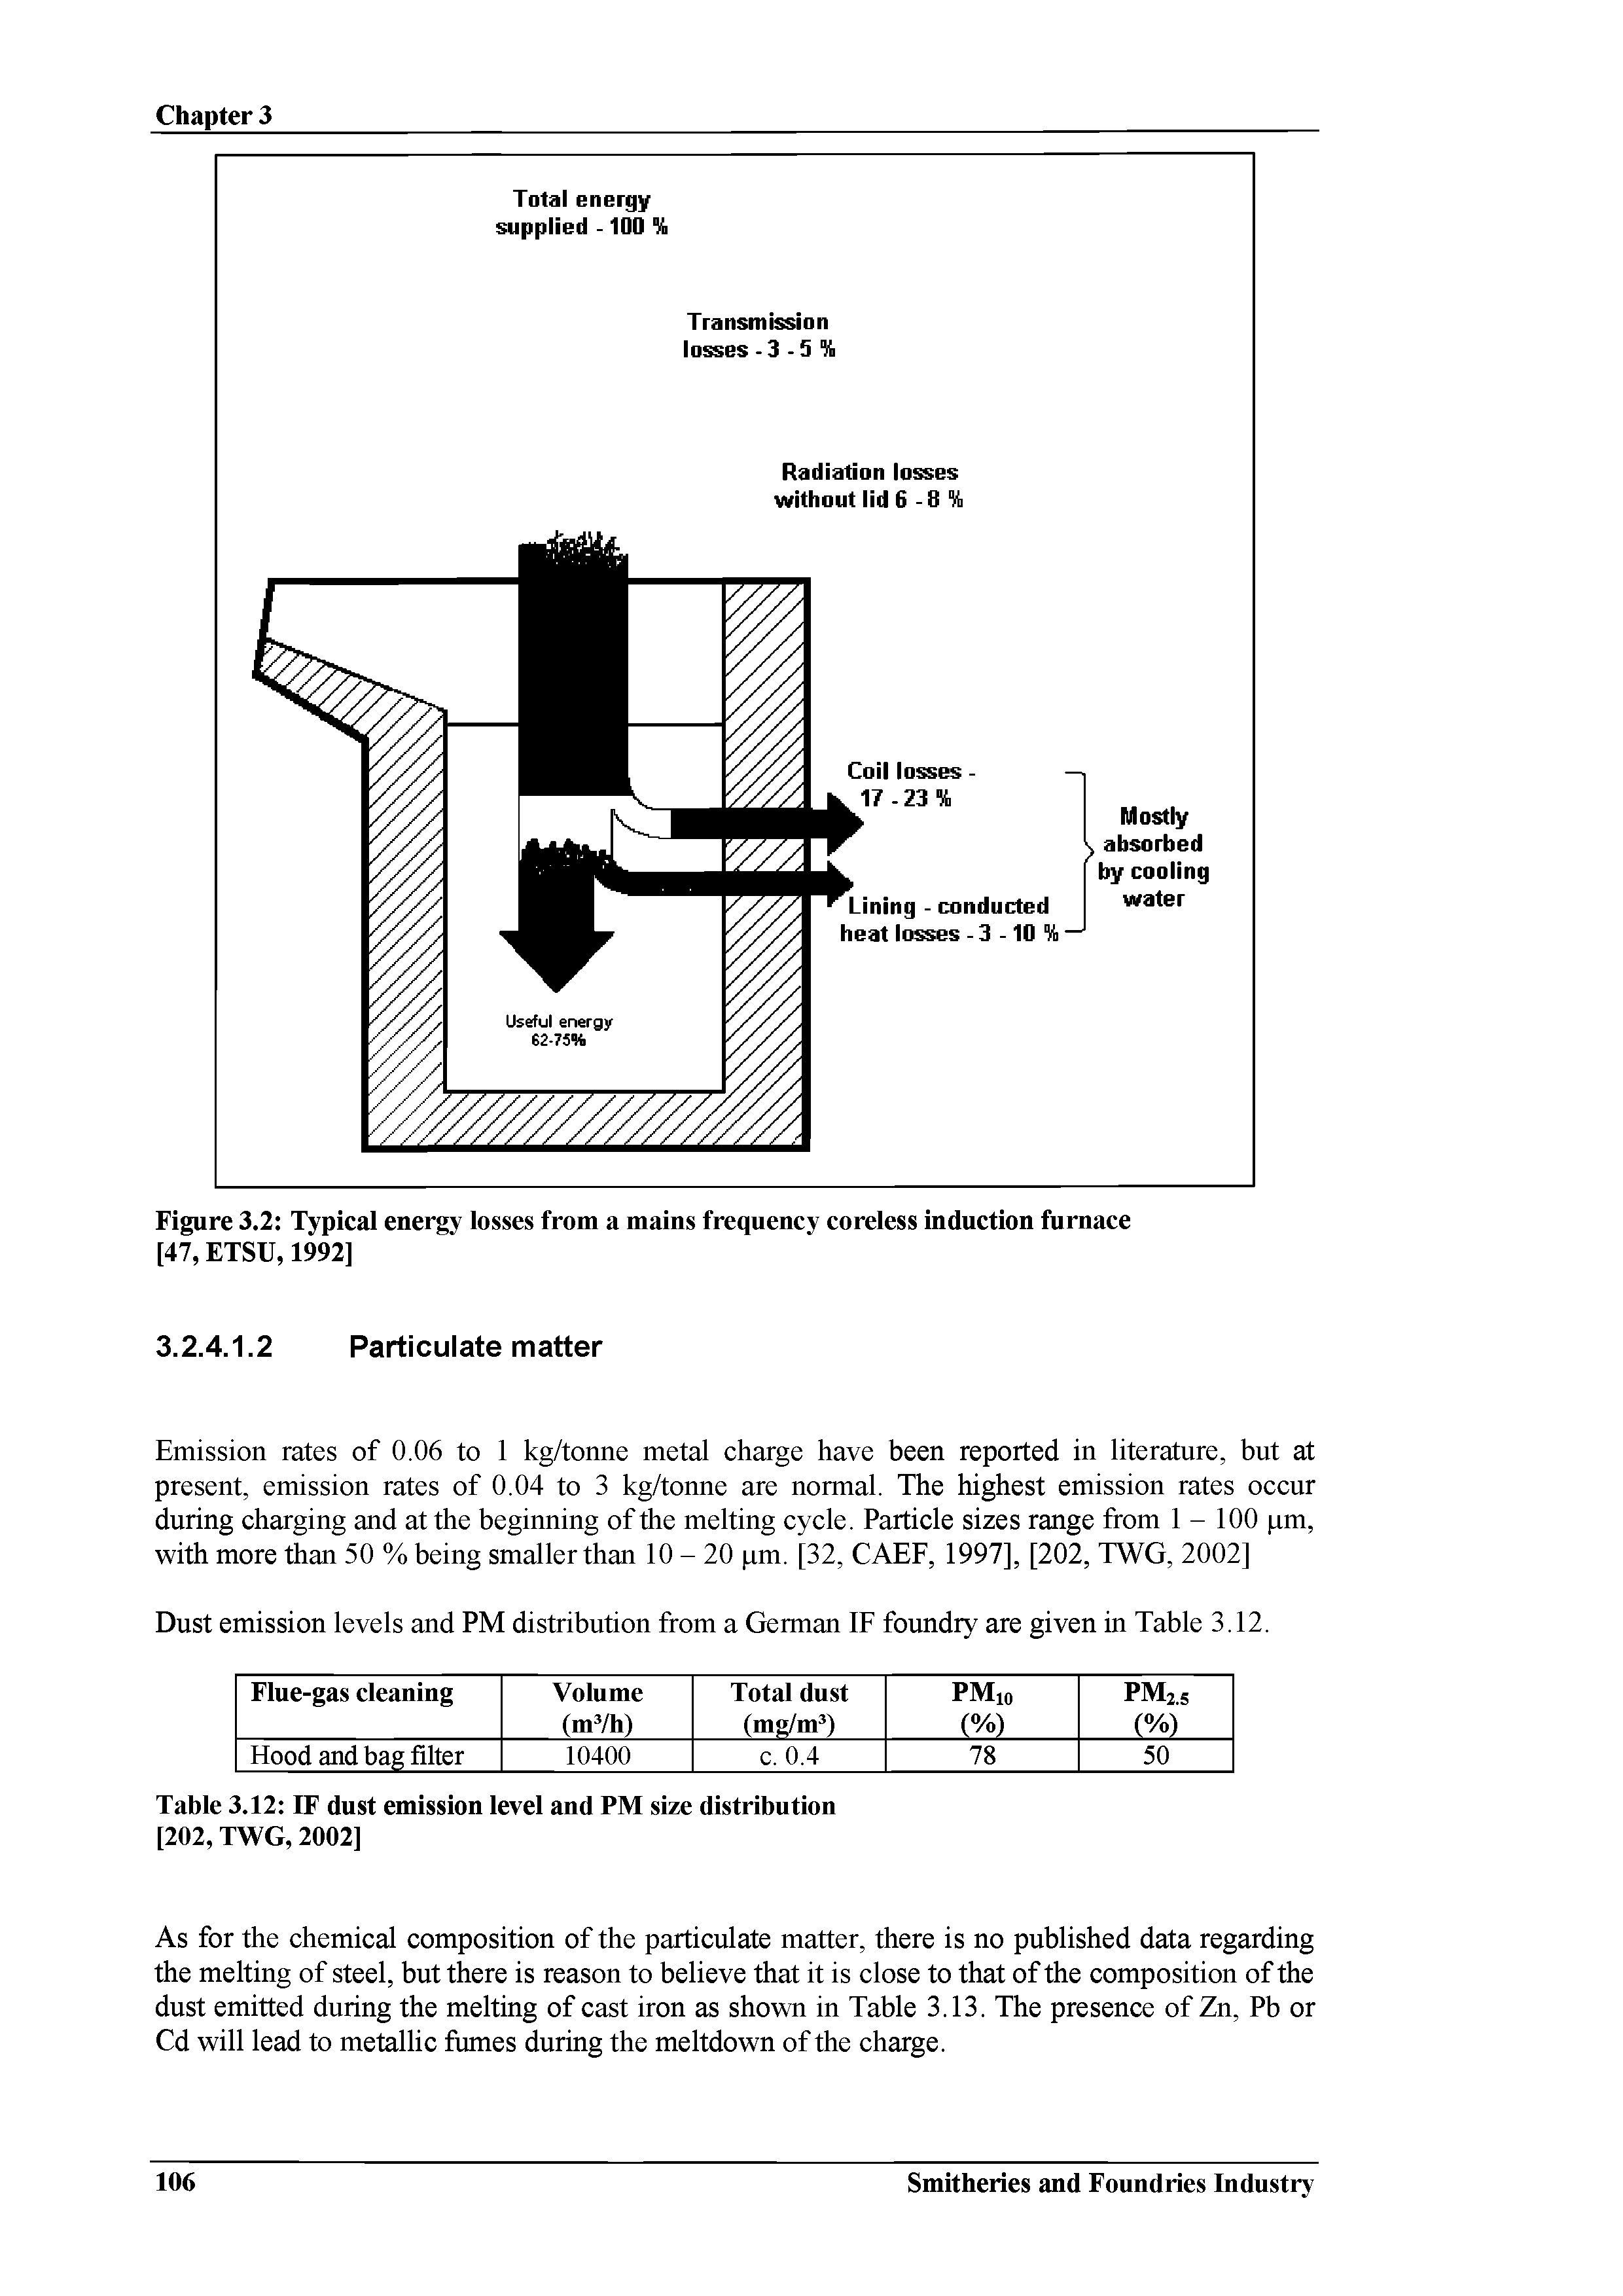 Figure 3.2 Typical energy losses from a mains frequency coreless induction furnace [47, ETSU, 1992]...